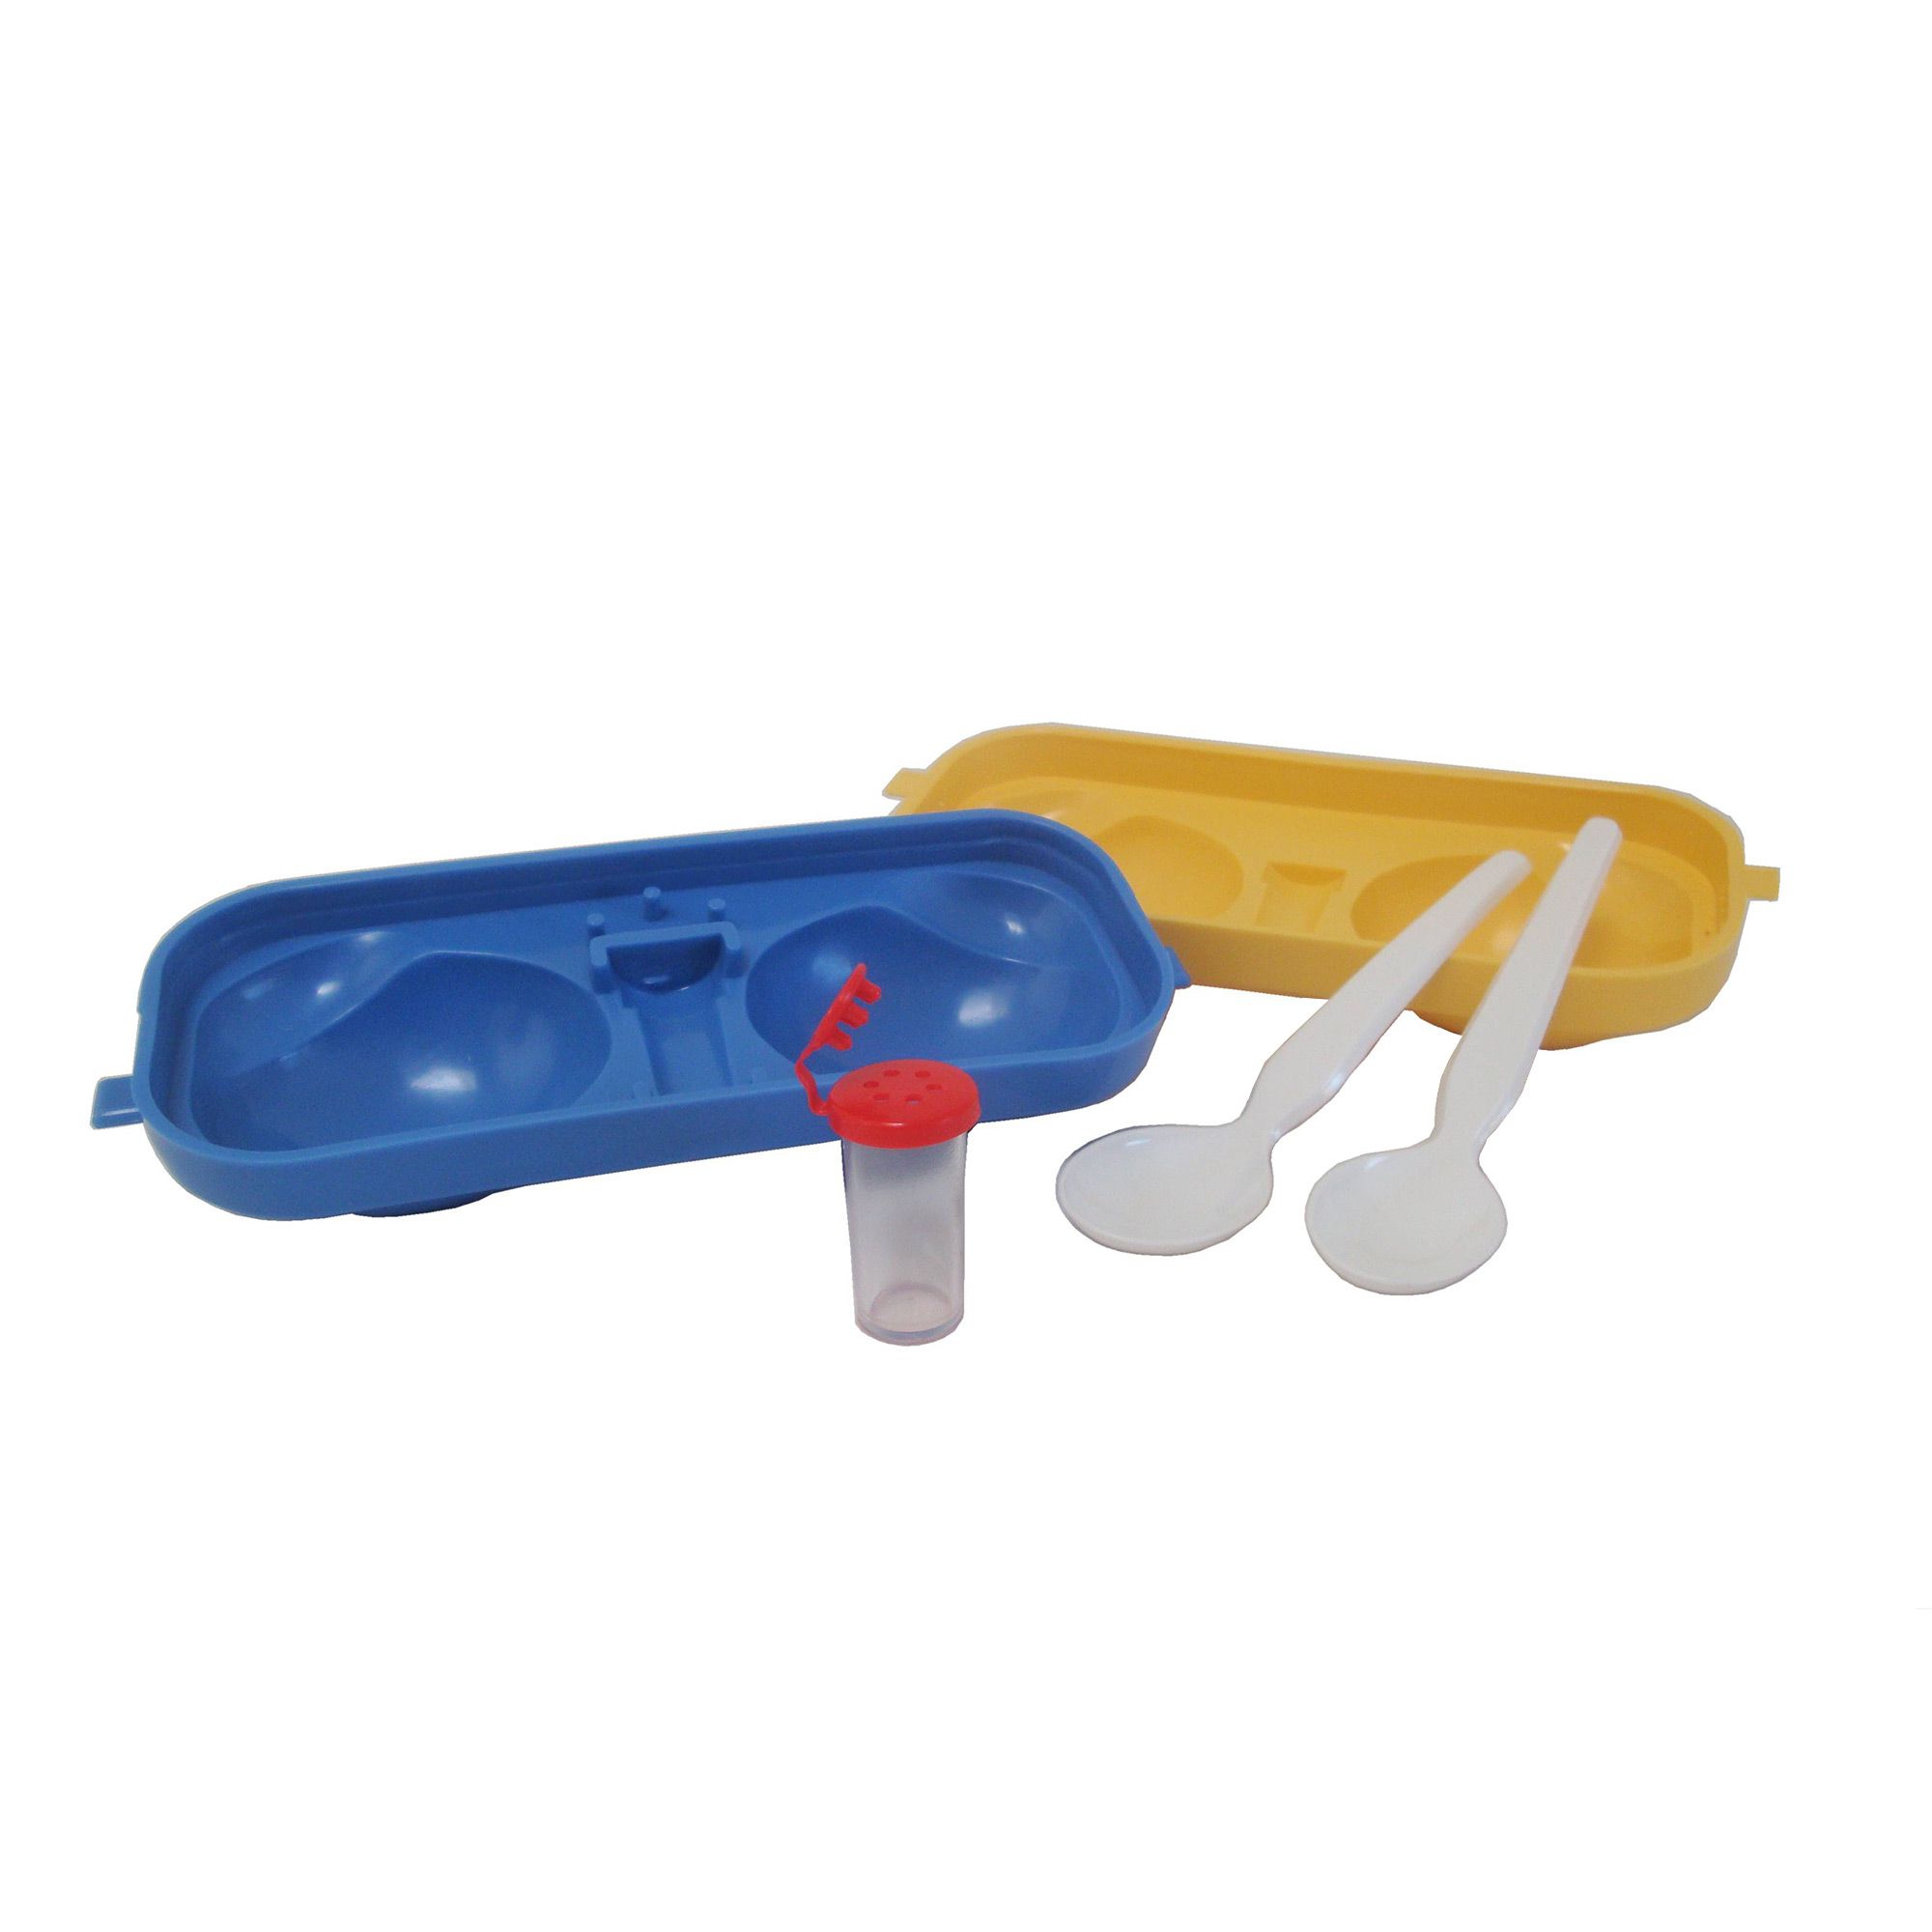 Sonja Plastic - Egg container with salt spreader + 2 spoons